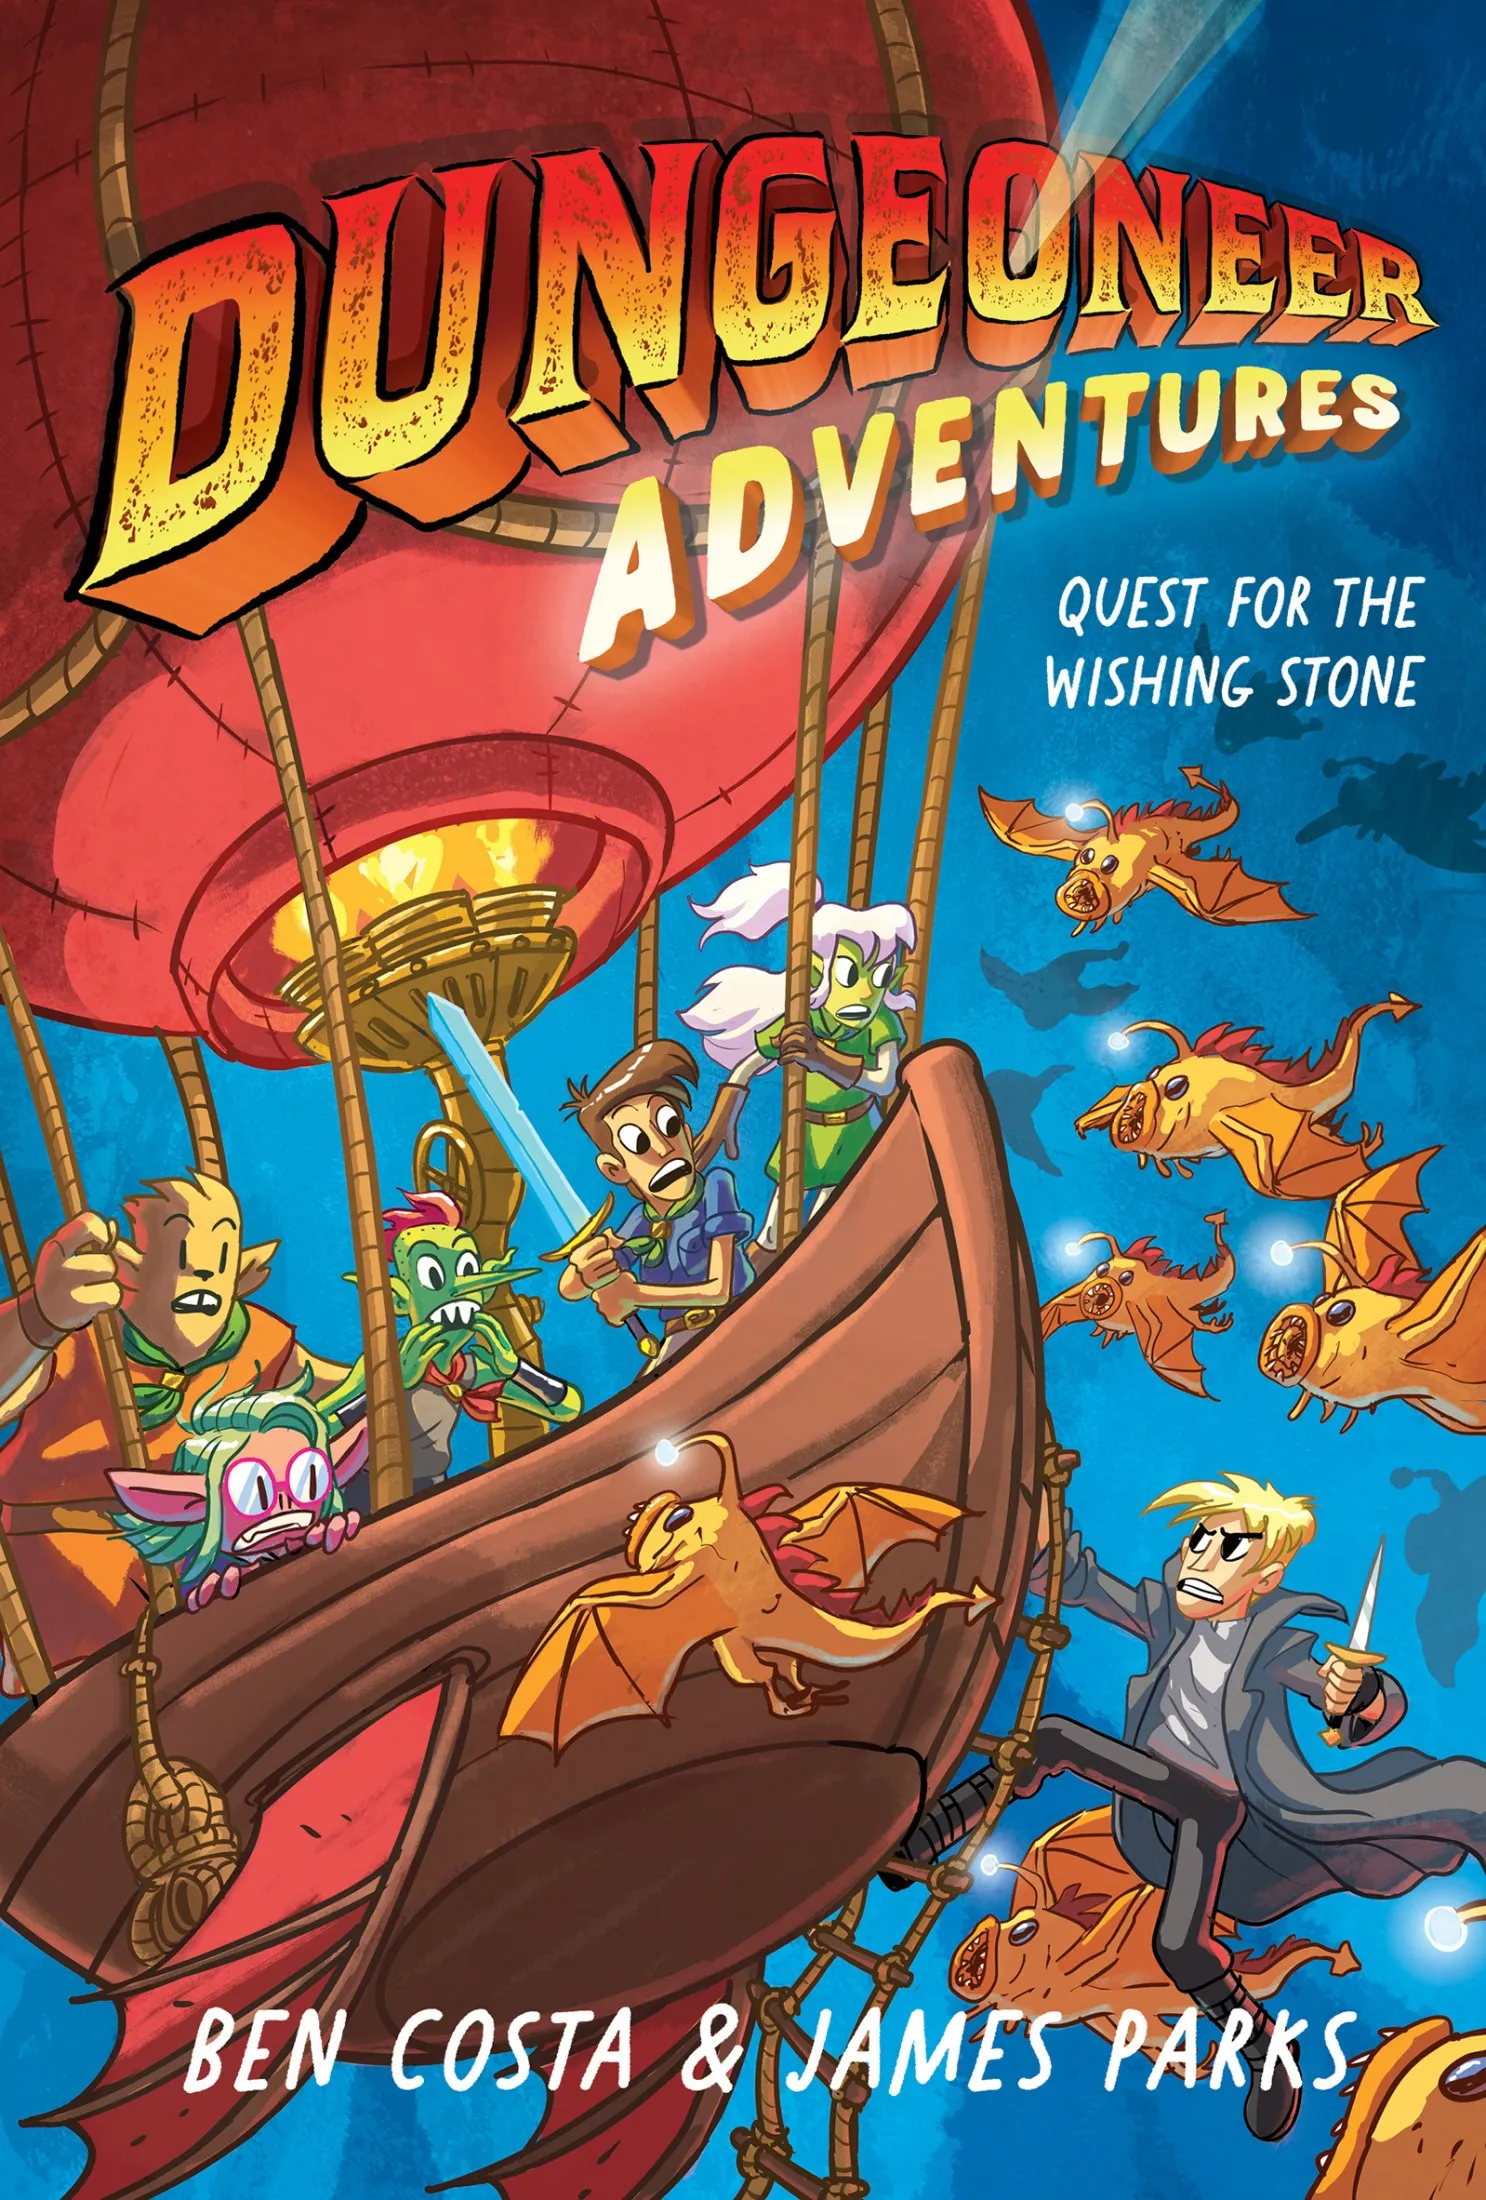 Quest for the Wishing Stone (Dungeoneer Adventures #3)